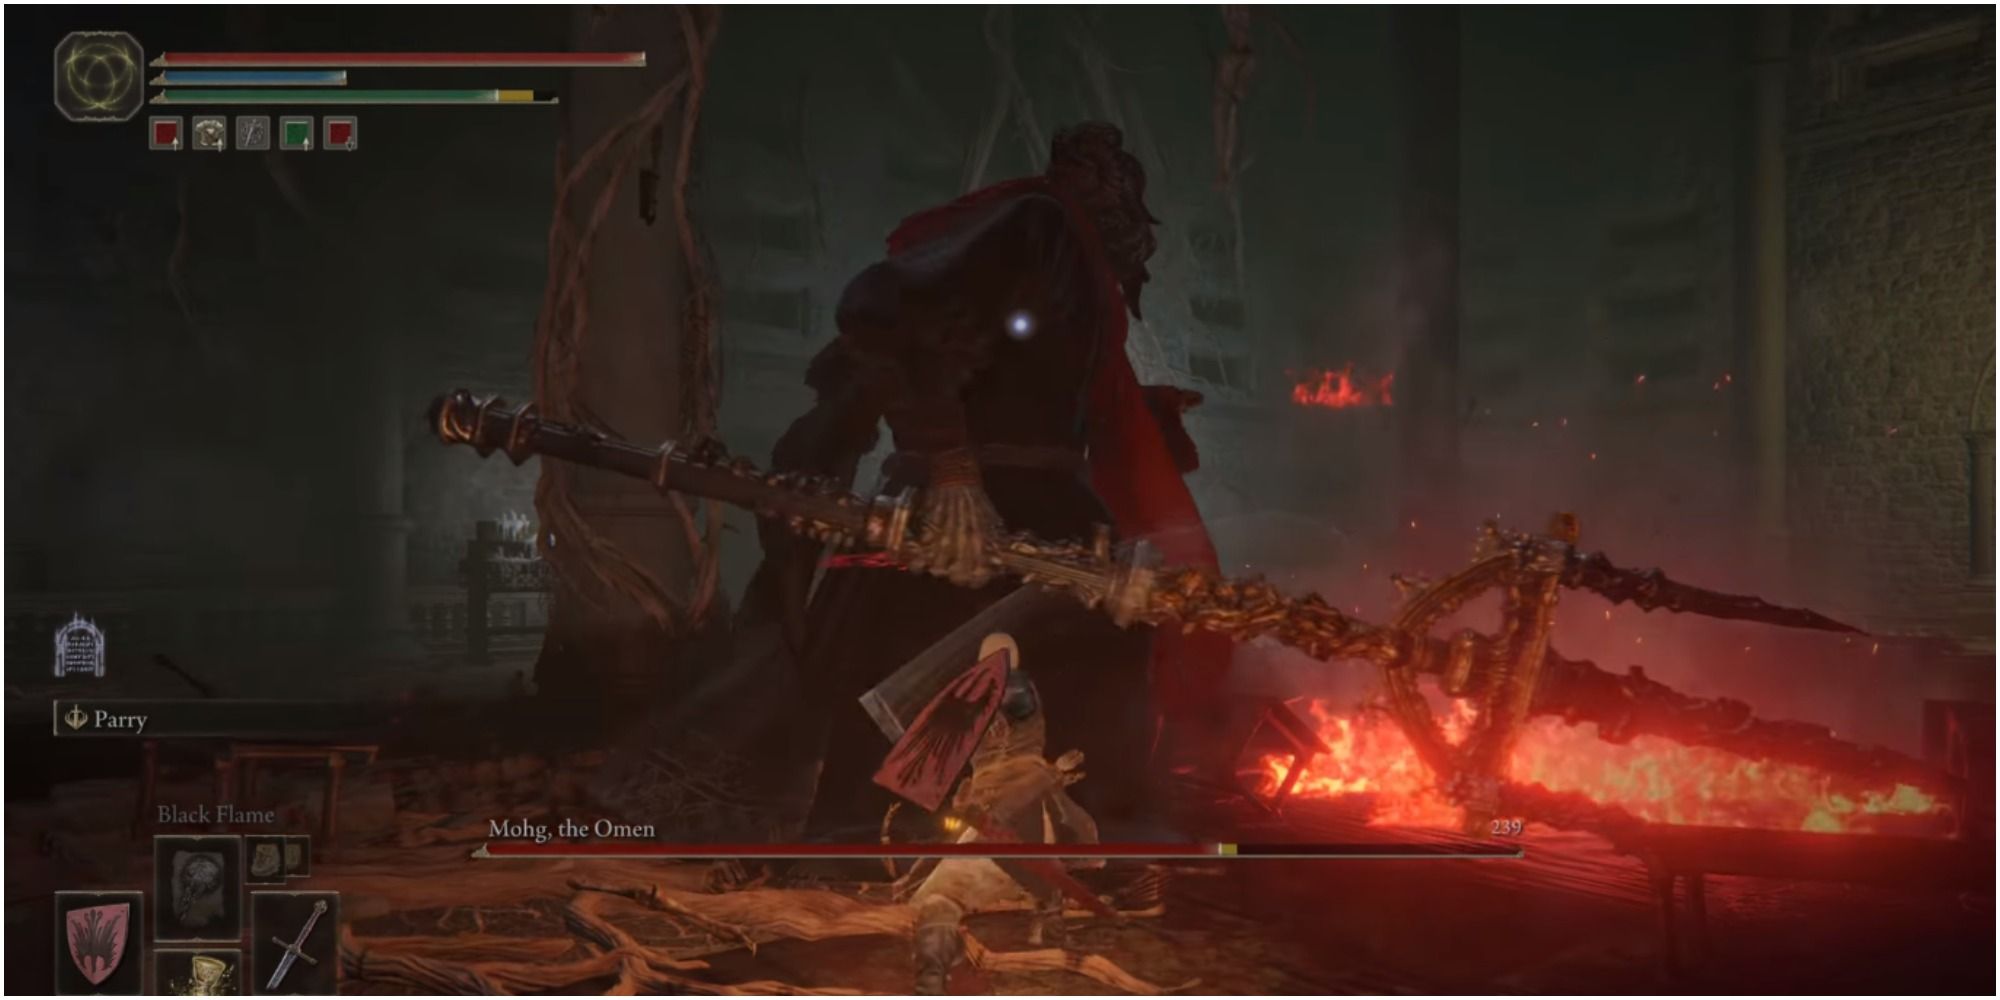 The player using Melee weapon to attack the player.